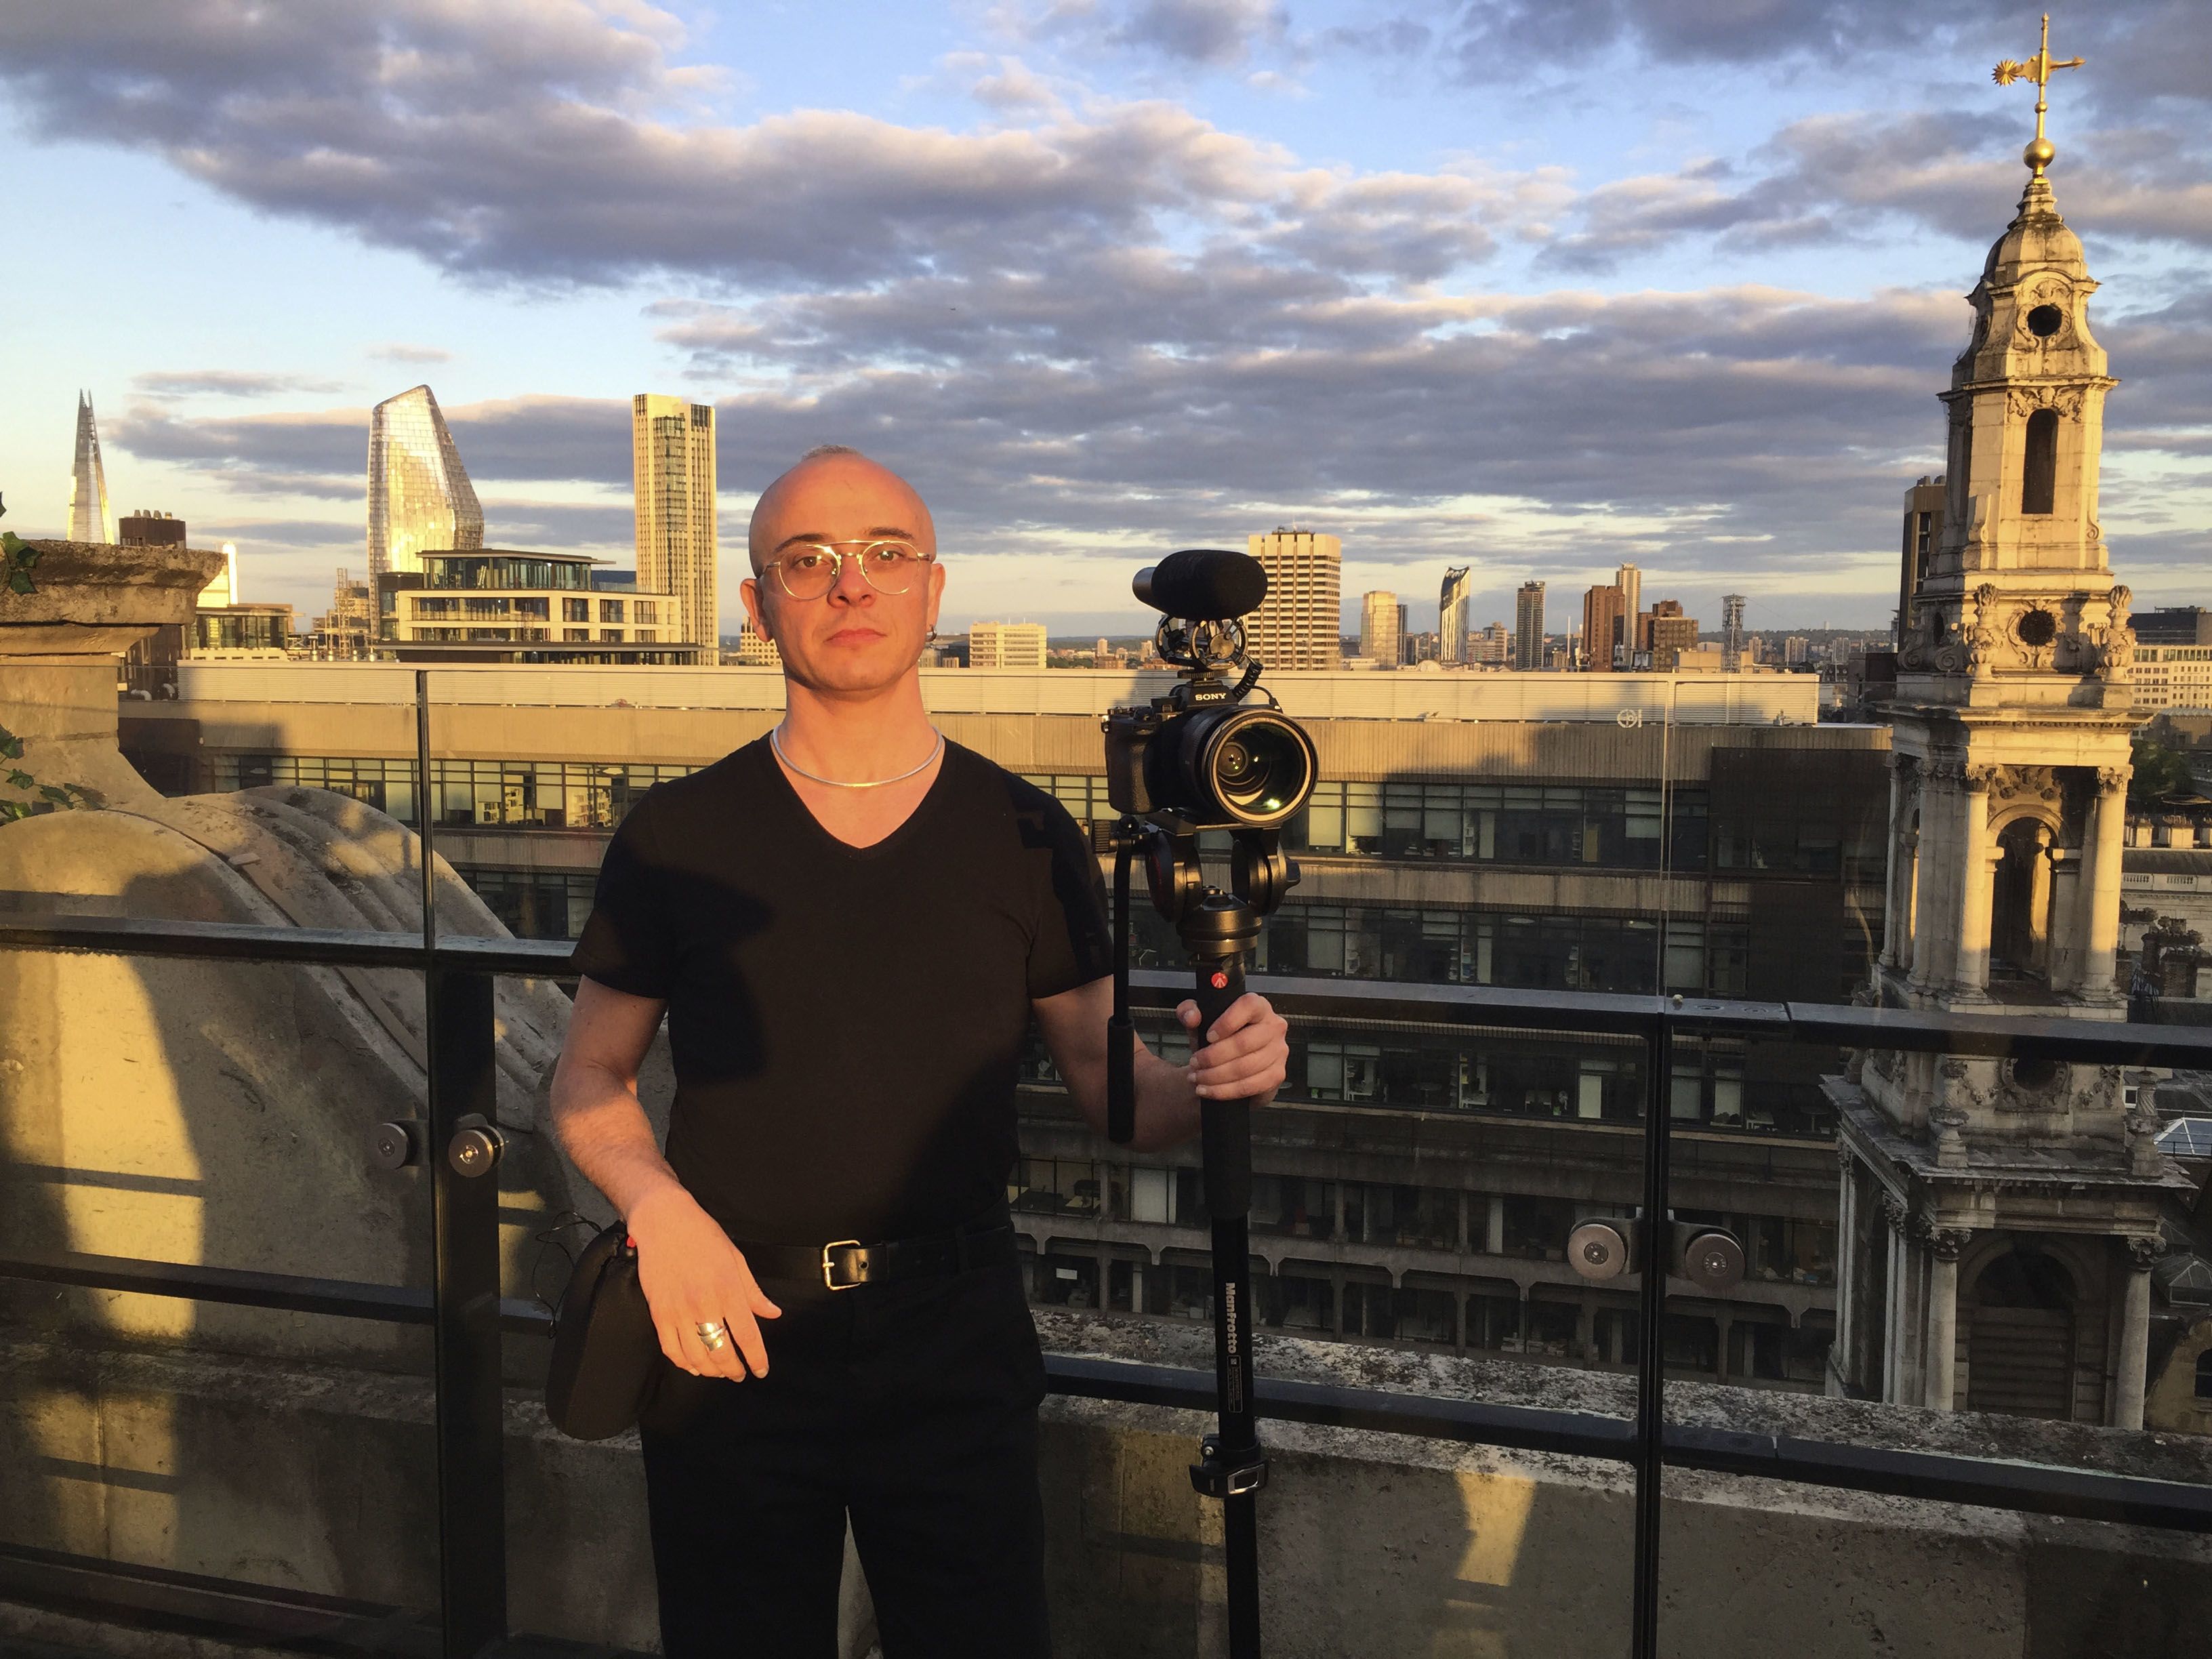 Portrait of Orlando holding his camera on a London rooftop